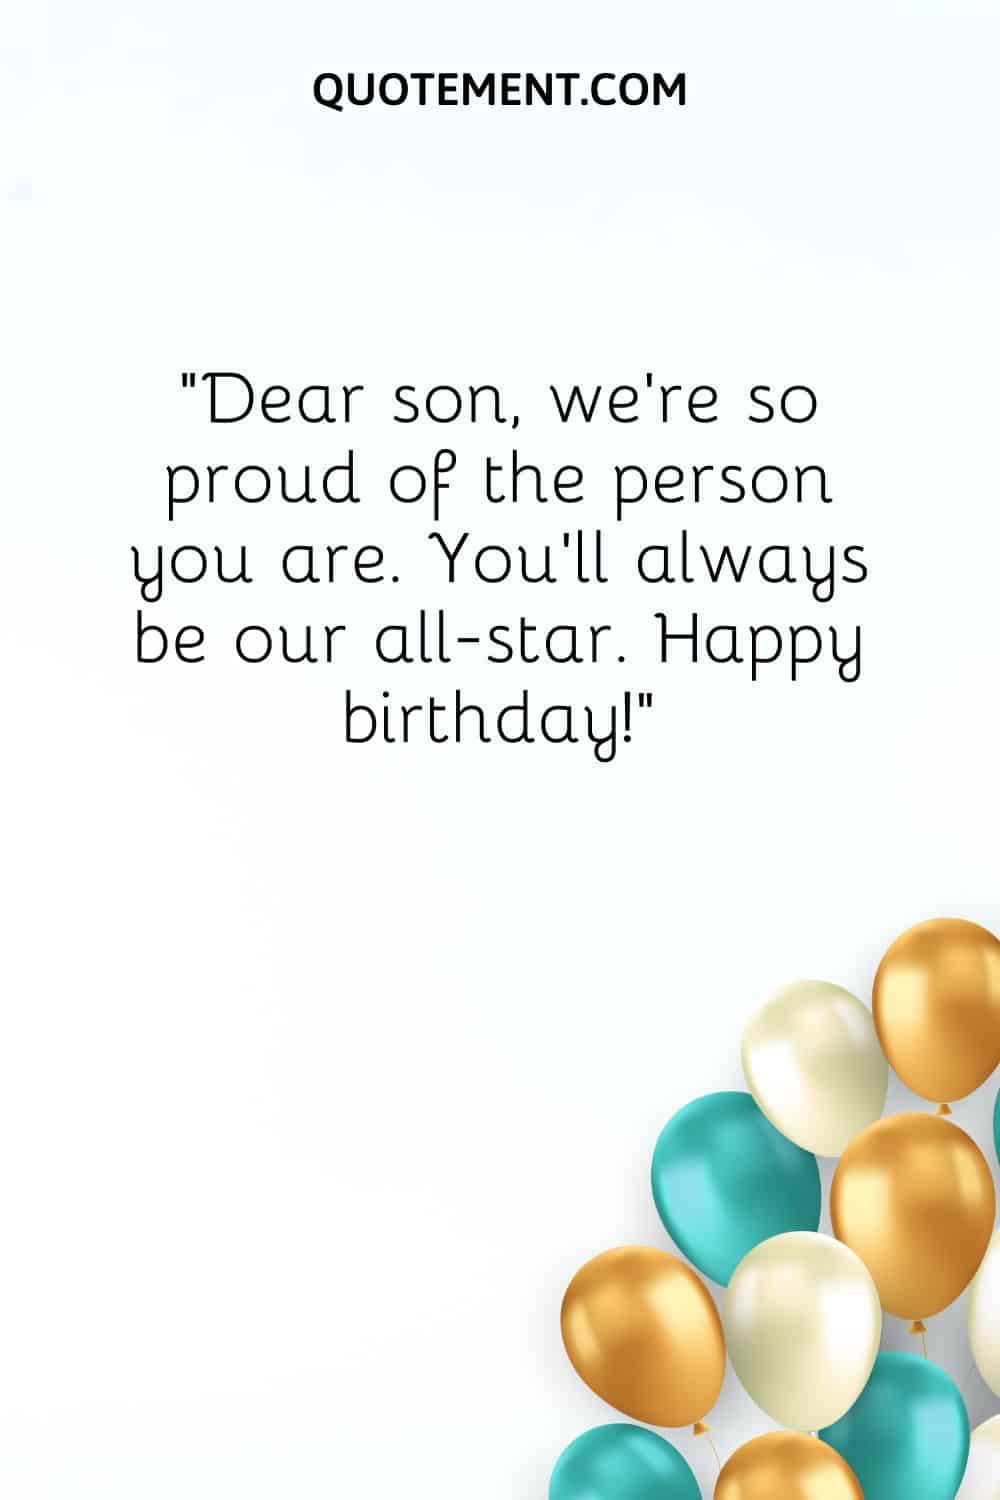 Dear son, we’re so proud of the person you are.